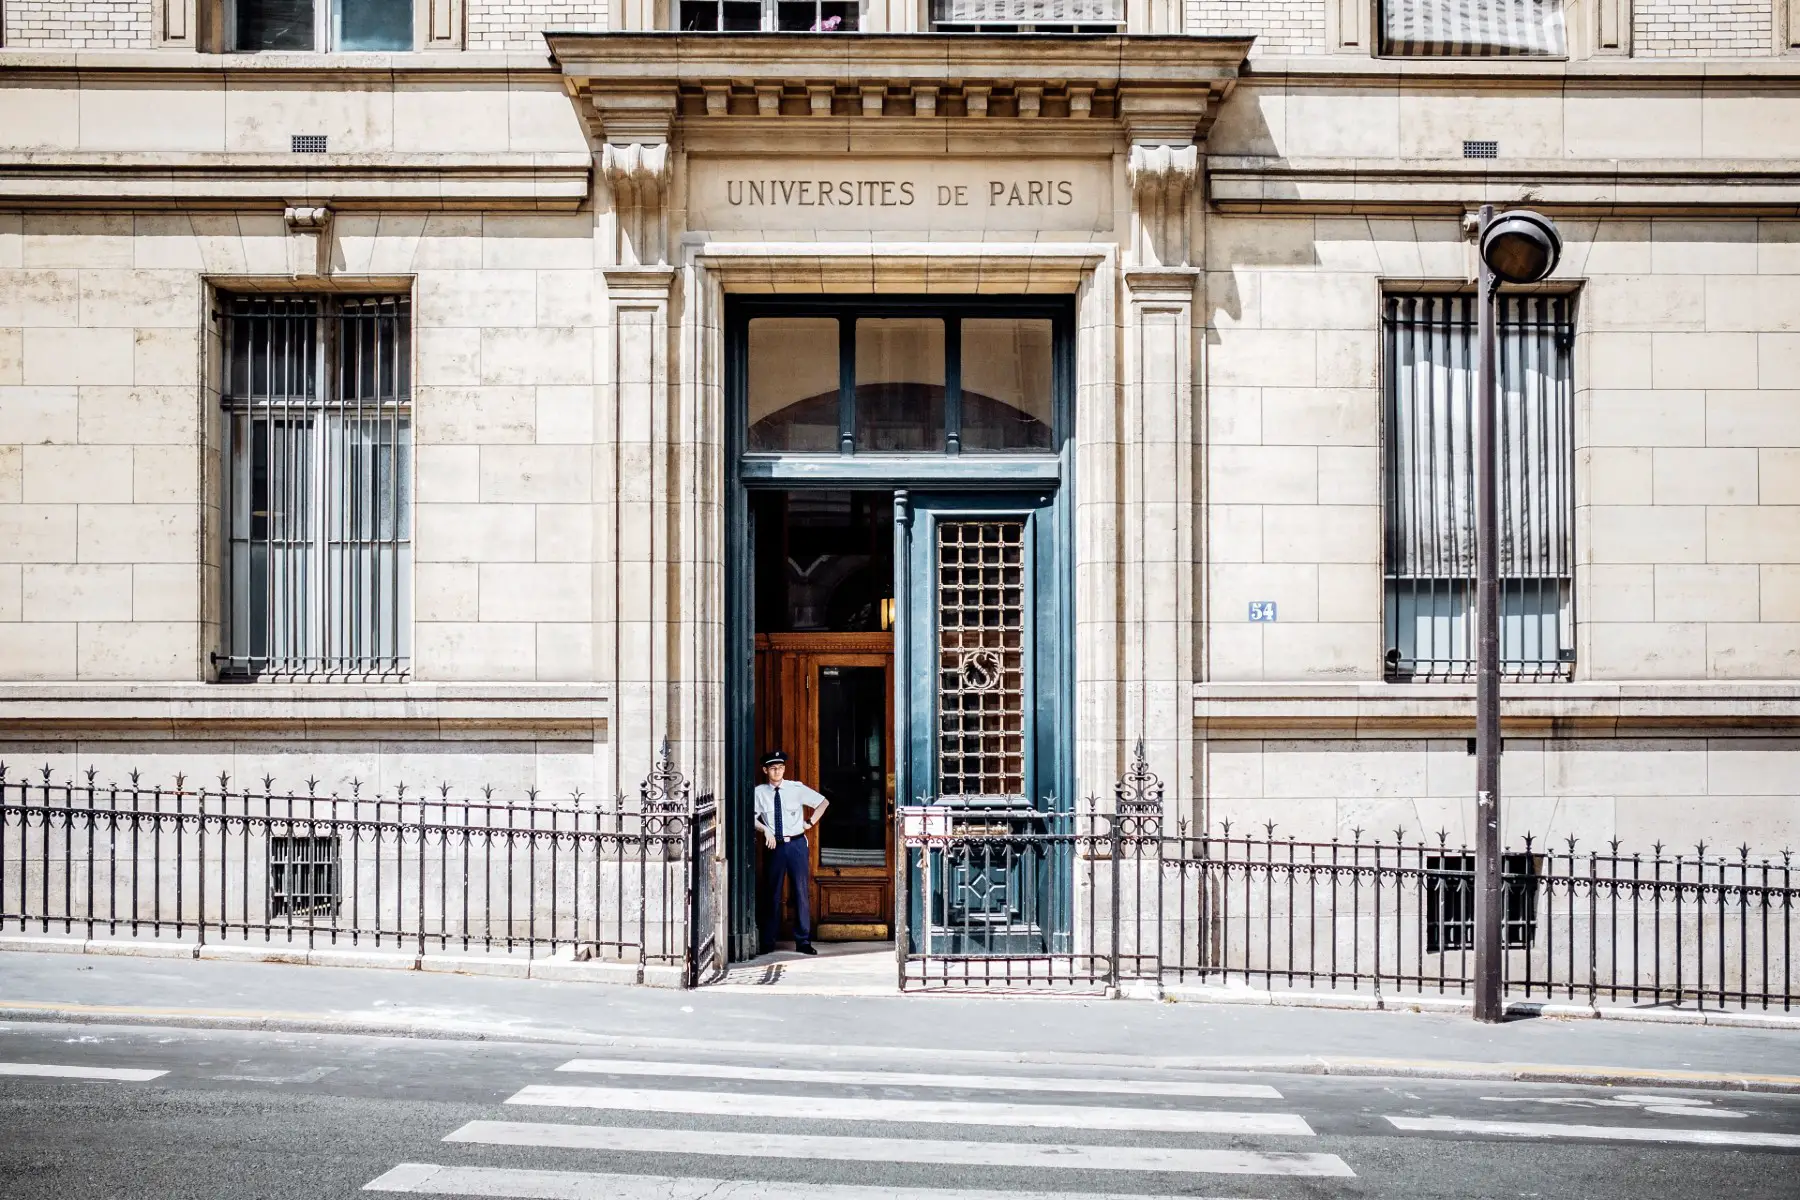 Guard standing at the door of the University of Paris, also known as La Sorbonne.